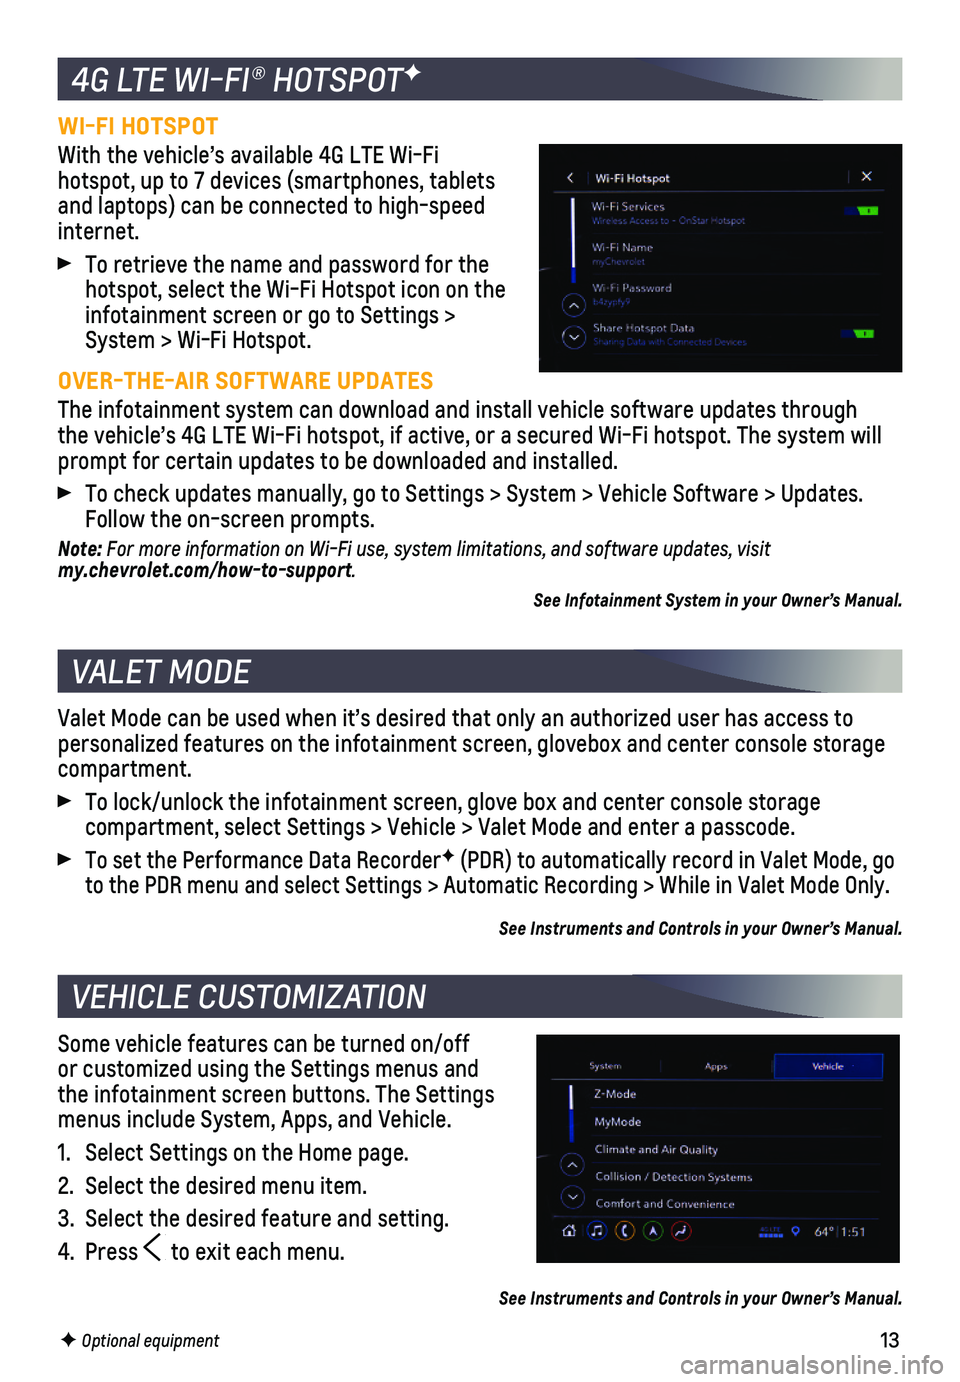 CHEVROLET CORVETTE 2021  Get To Know Guide 13
WI-FI HOTSPOT
With the vehicle’s available 4G LTE Wi-Fi hotspot, up to 7 devices (smartphones, tablets and laptops) can be connected to high-speed internet. 
 To retrieve the name and password fo